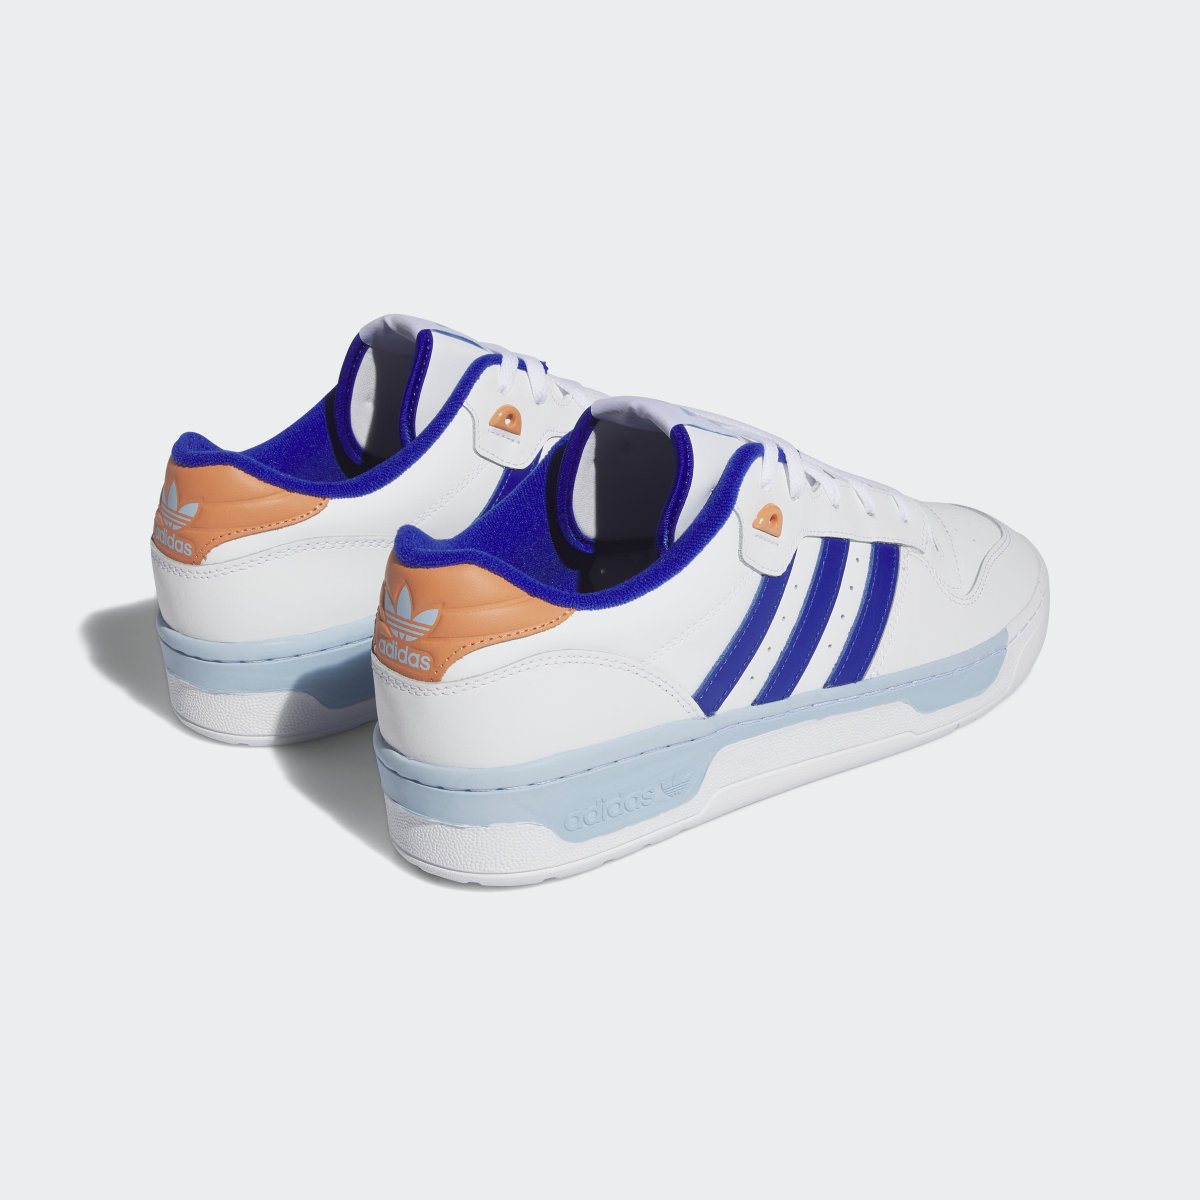 Adidas Rivalry Shoes. 6